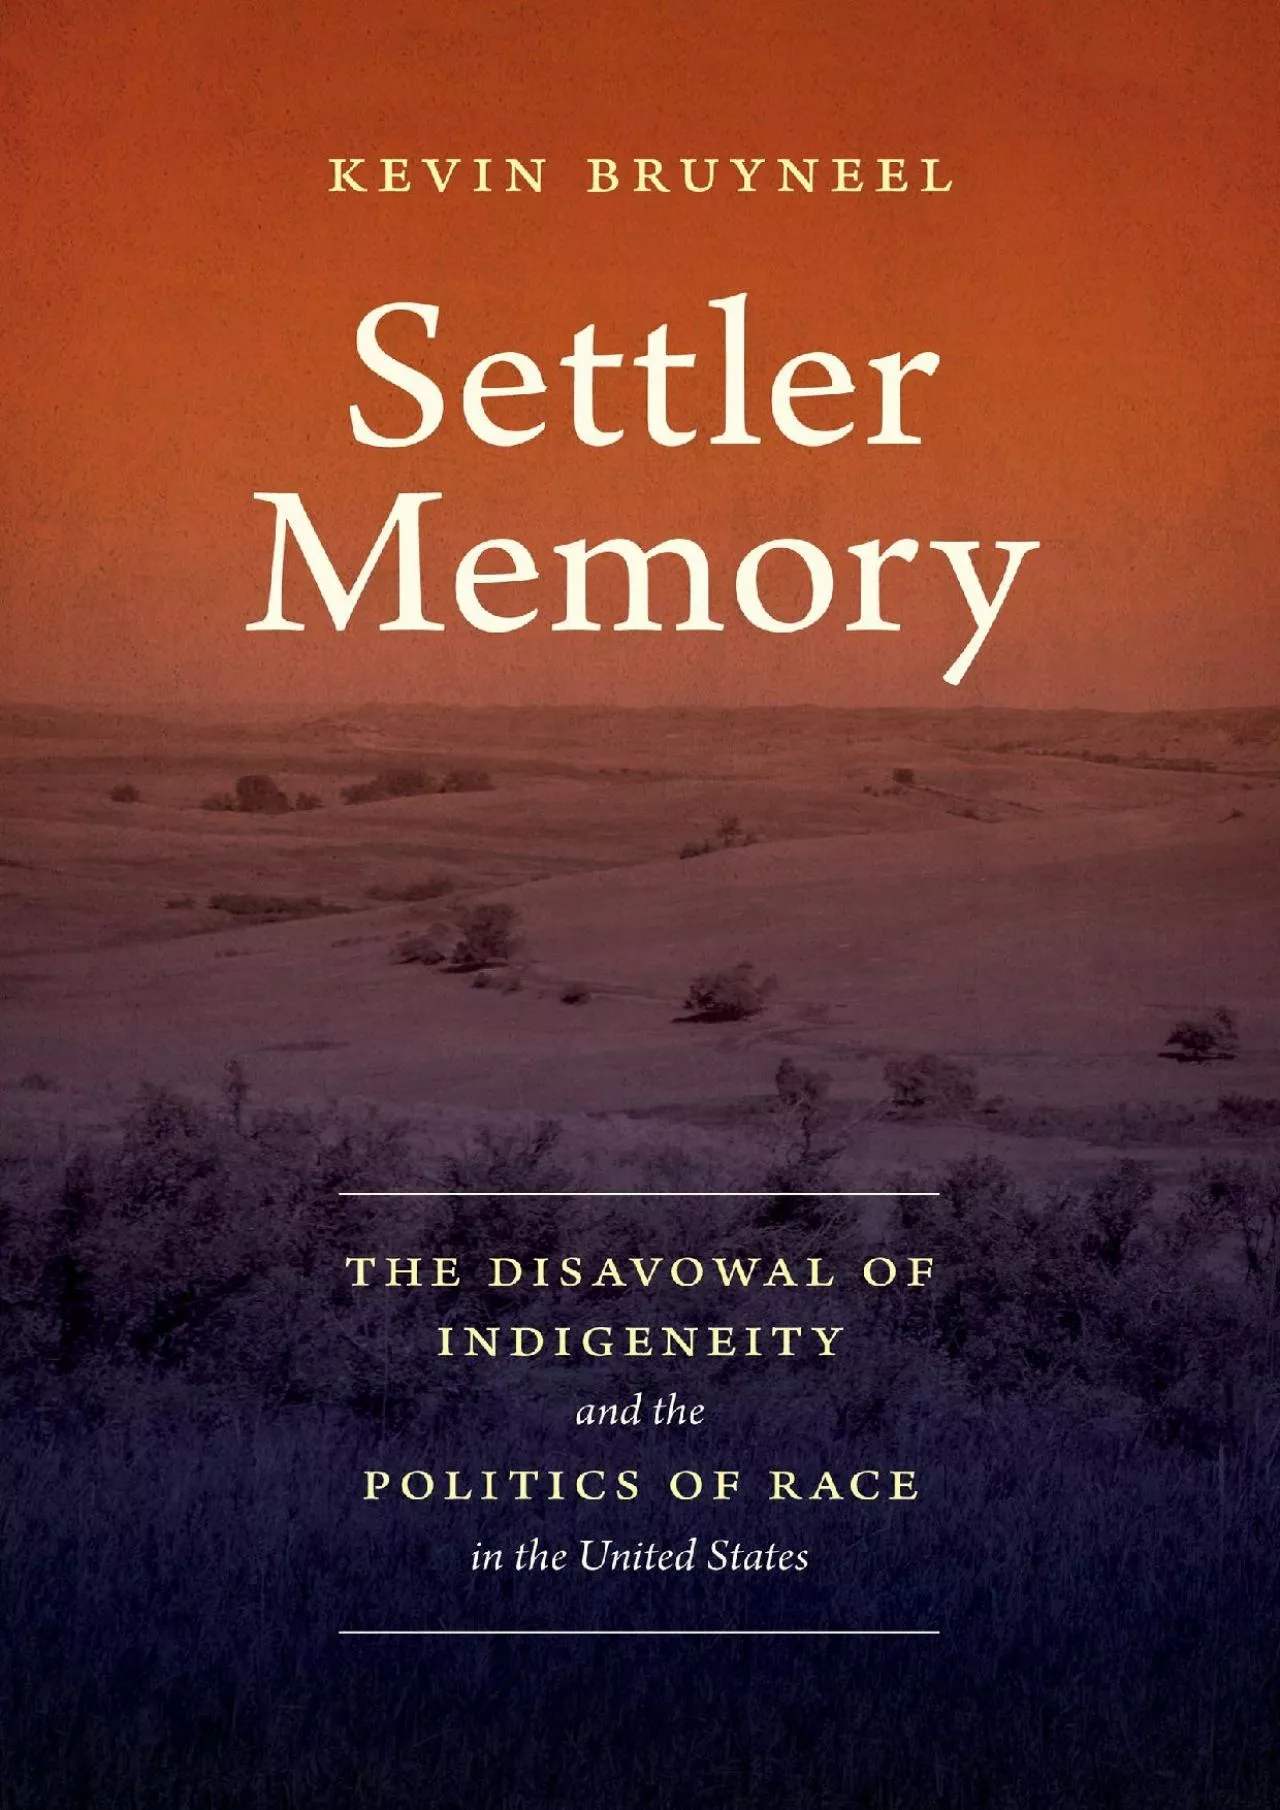 (BOOS)-Settler Memory: The Disavowal of Indigeneity and the Politics of Race in the United